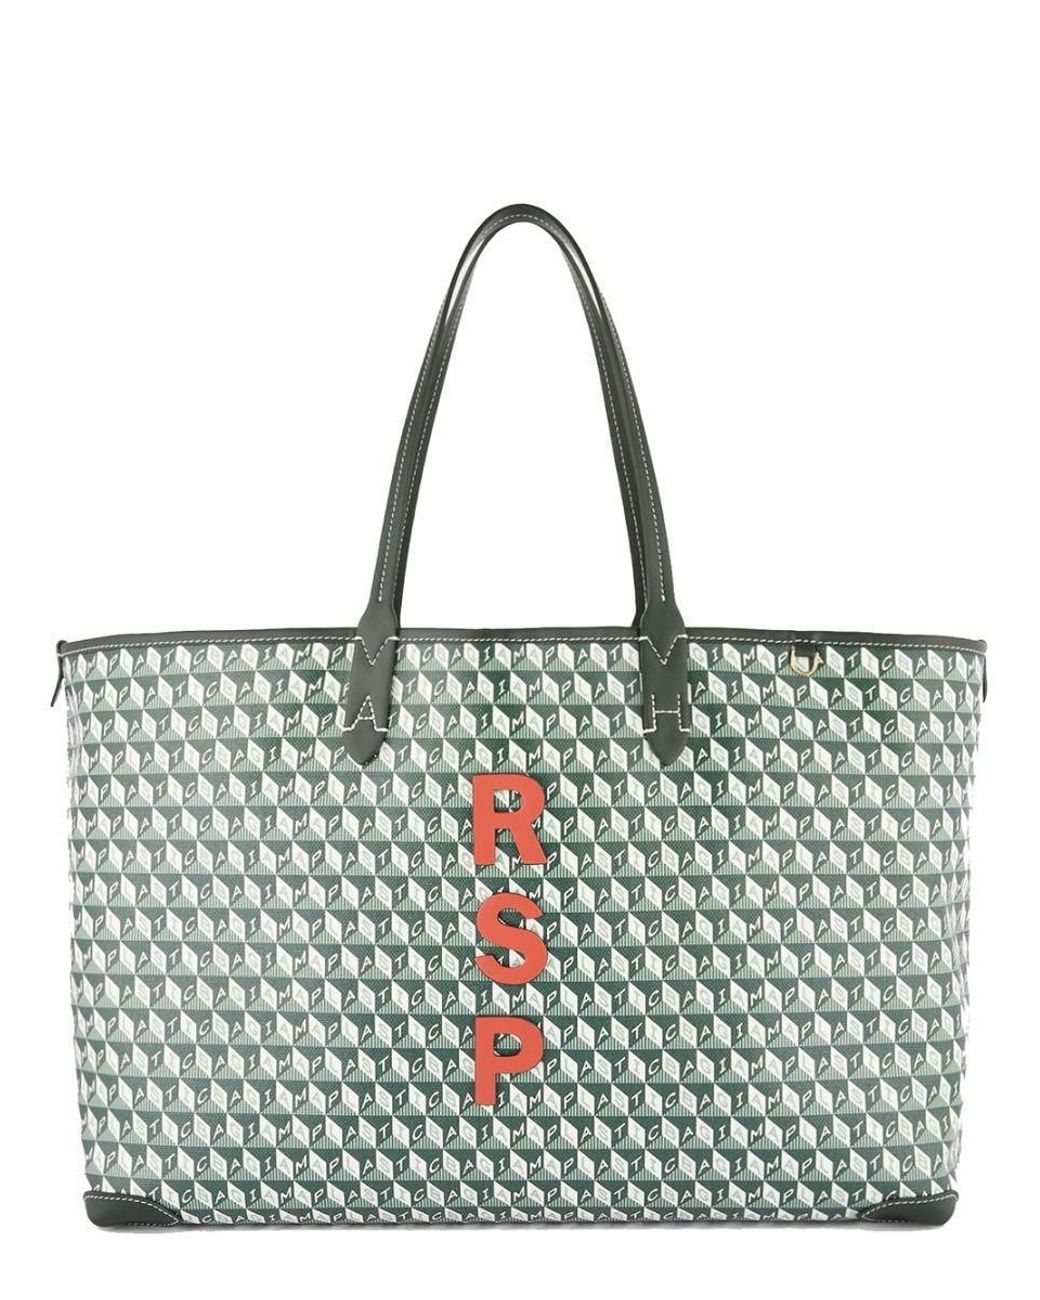 Anya Hindmarch I Am A Plastic Bag Tote In Pine Green Recycled Canvas | Lyst